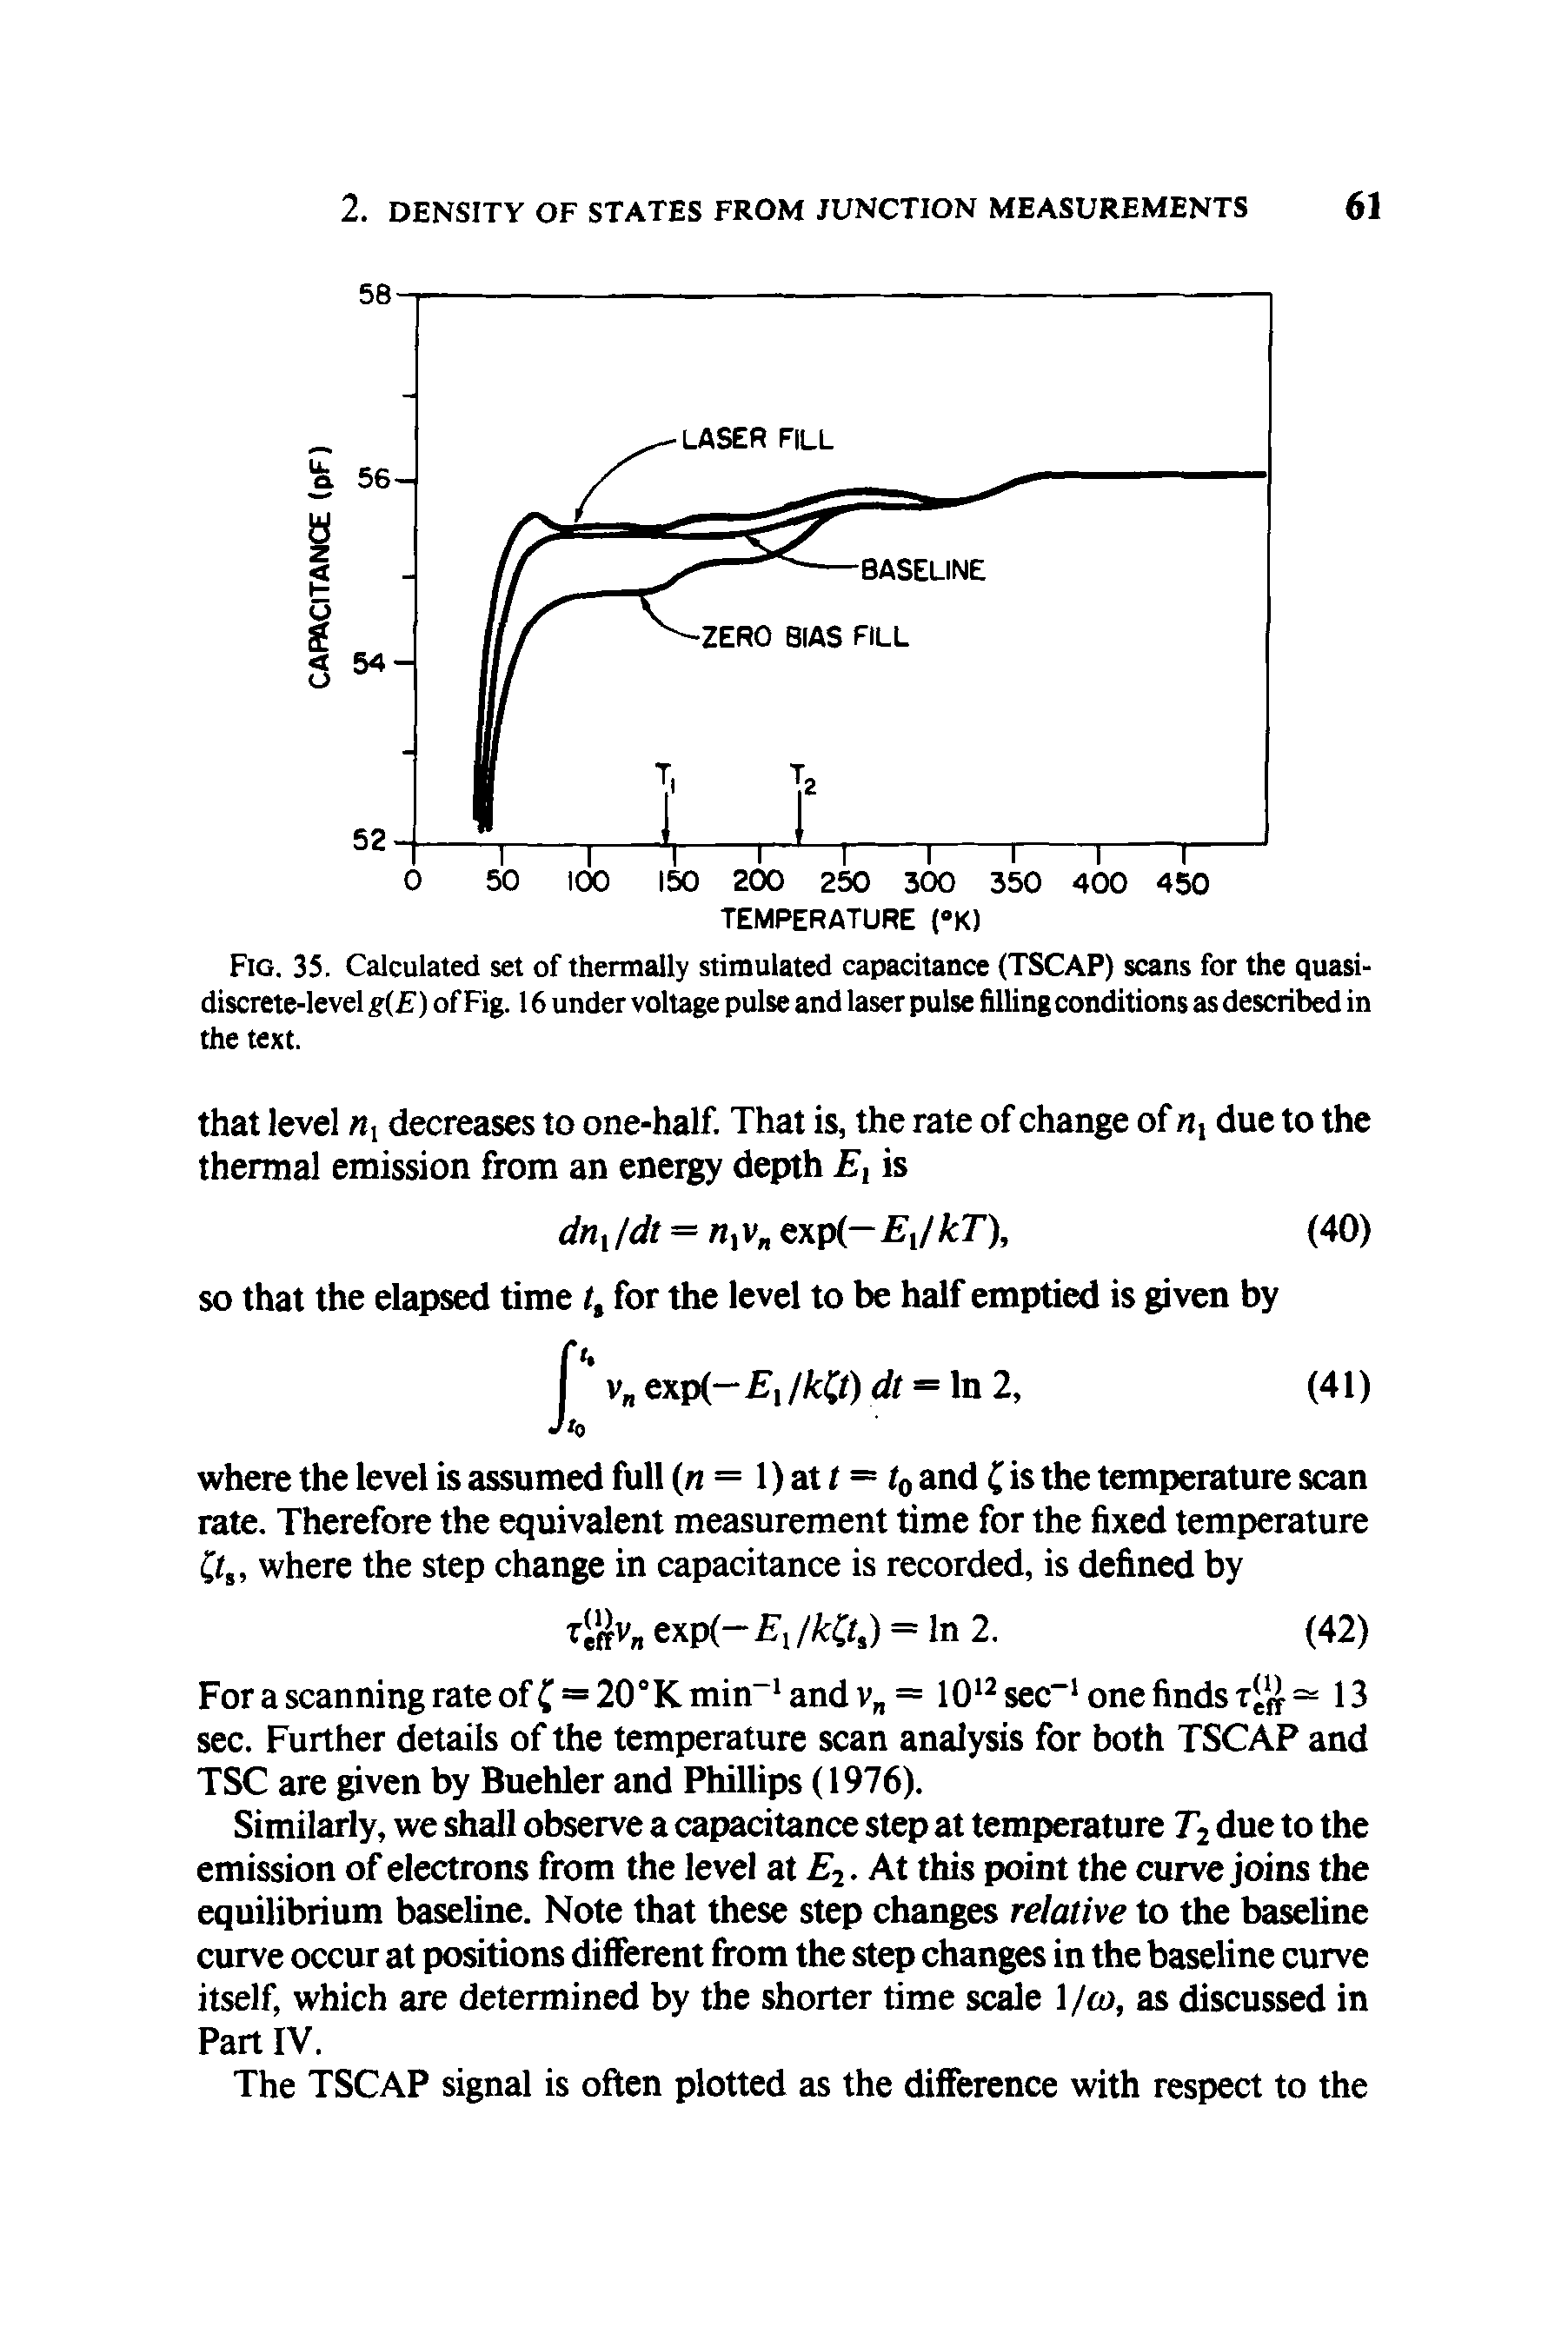 Fig. 35. Calculated set of thermally stimulated capacitance (TSCAP) scans for the quasidiscrete-level g(E) of Fig. 16 under voltage pulse and laser pulse filling conditions as described in the text.